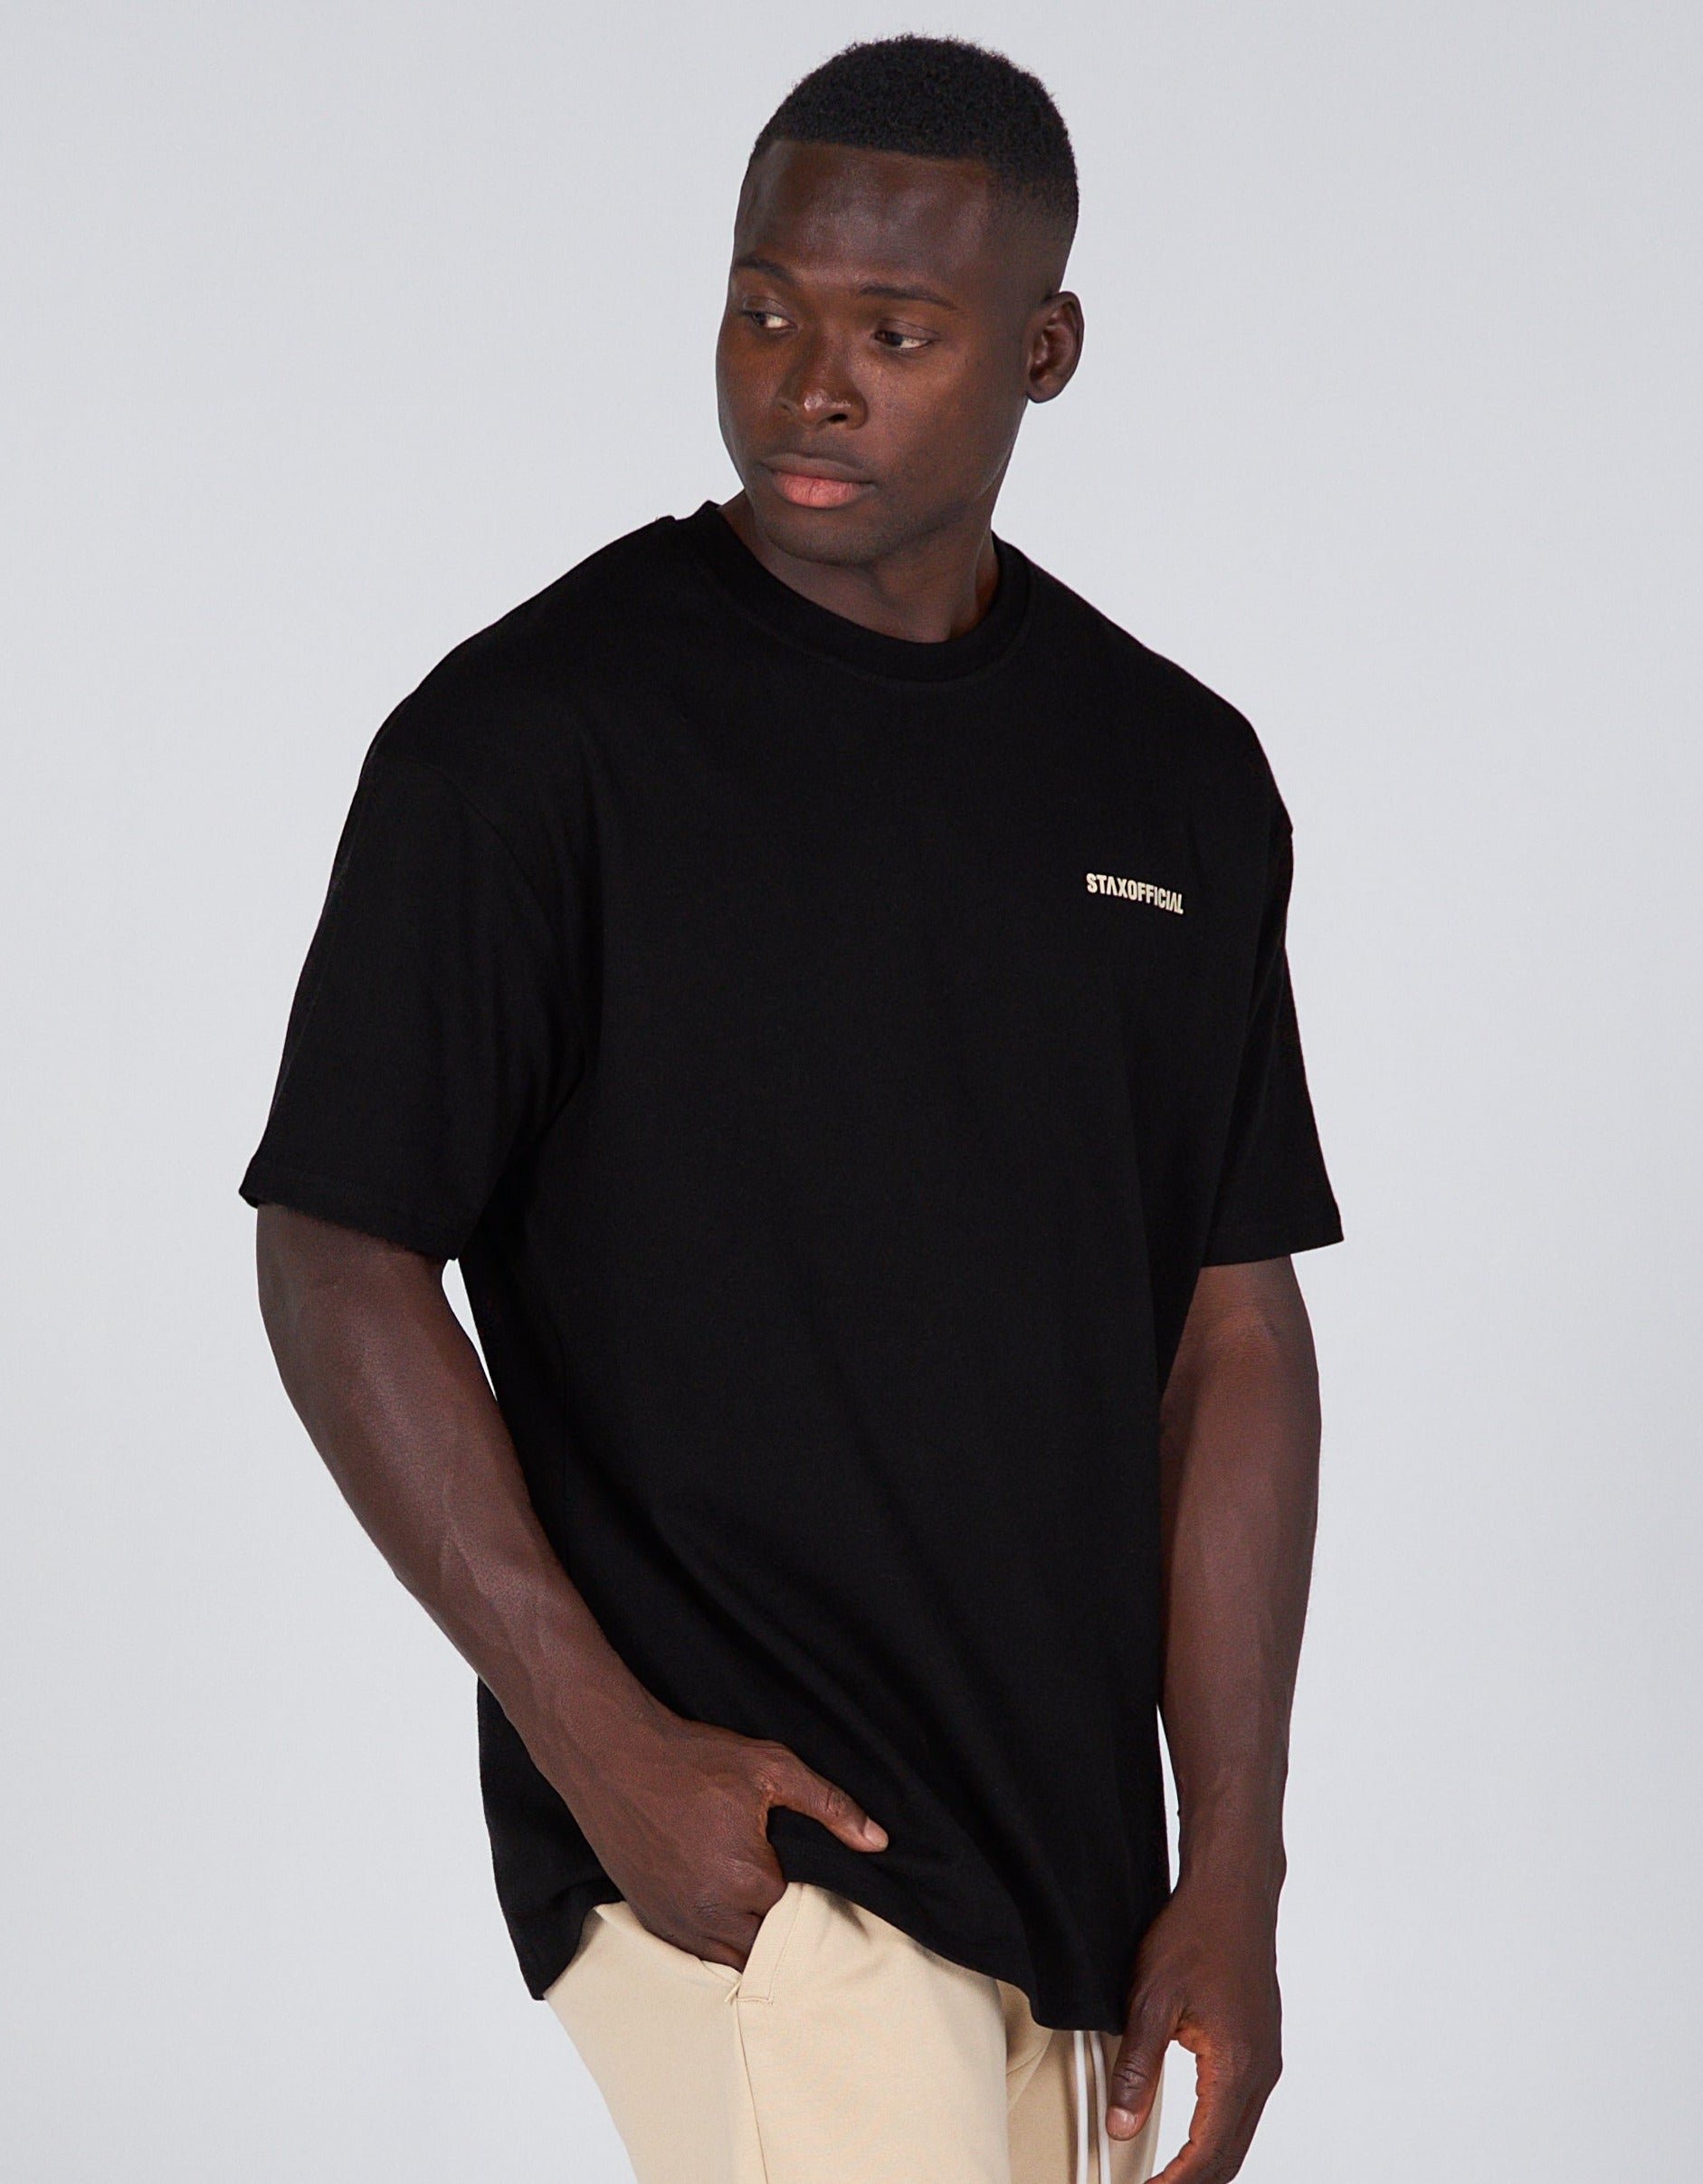 staxofficial-standard-fit-tee-black-cream-logo